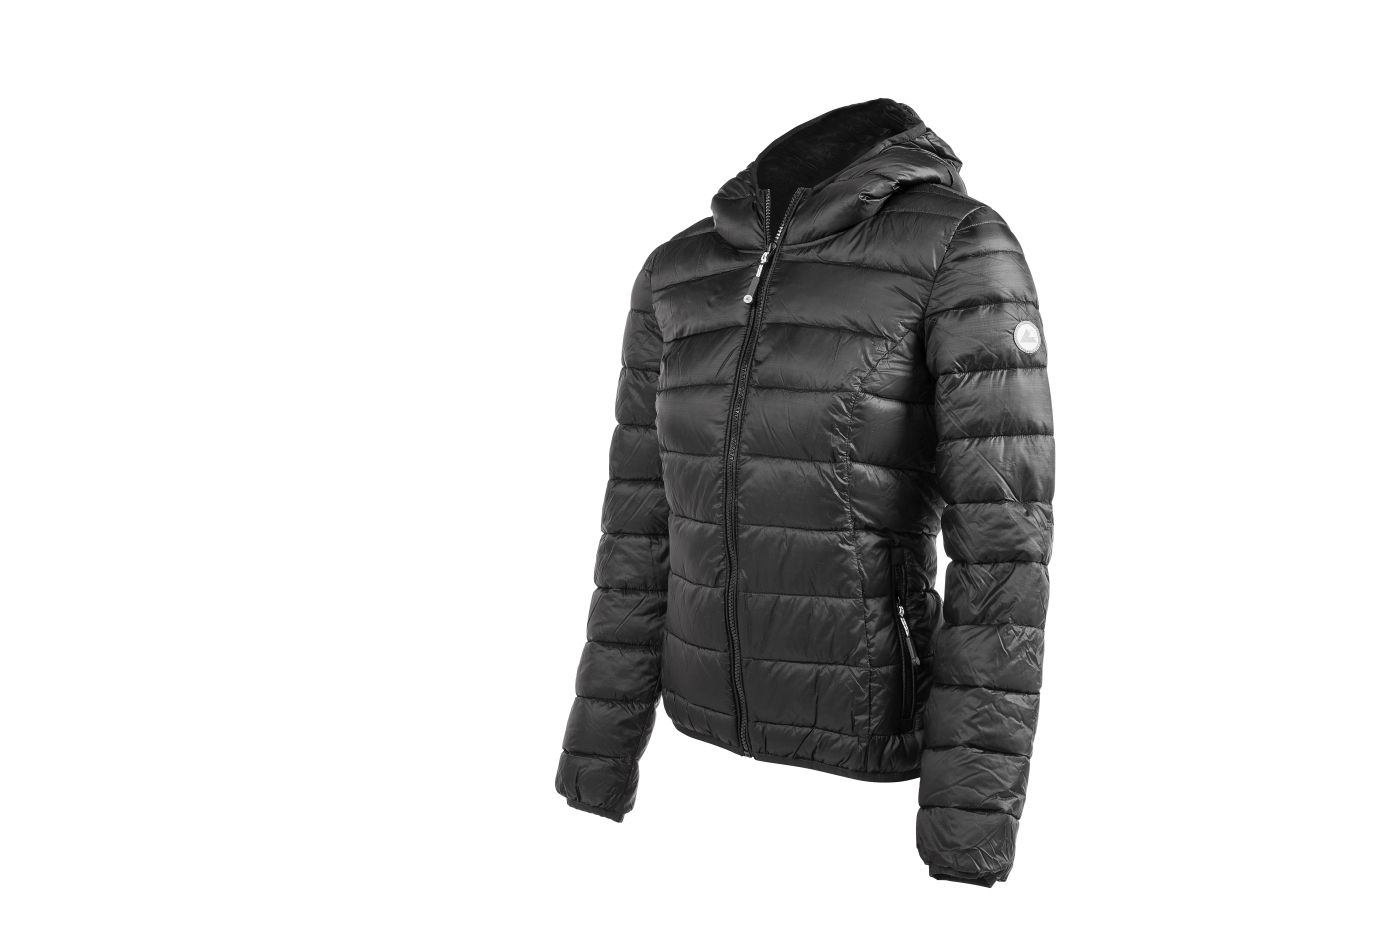 Hooded quilted jacket "Cortina", womenHooded quilted jacket "Cortina", women